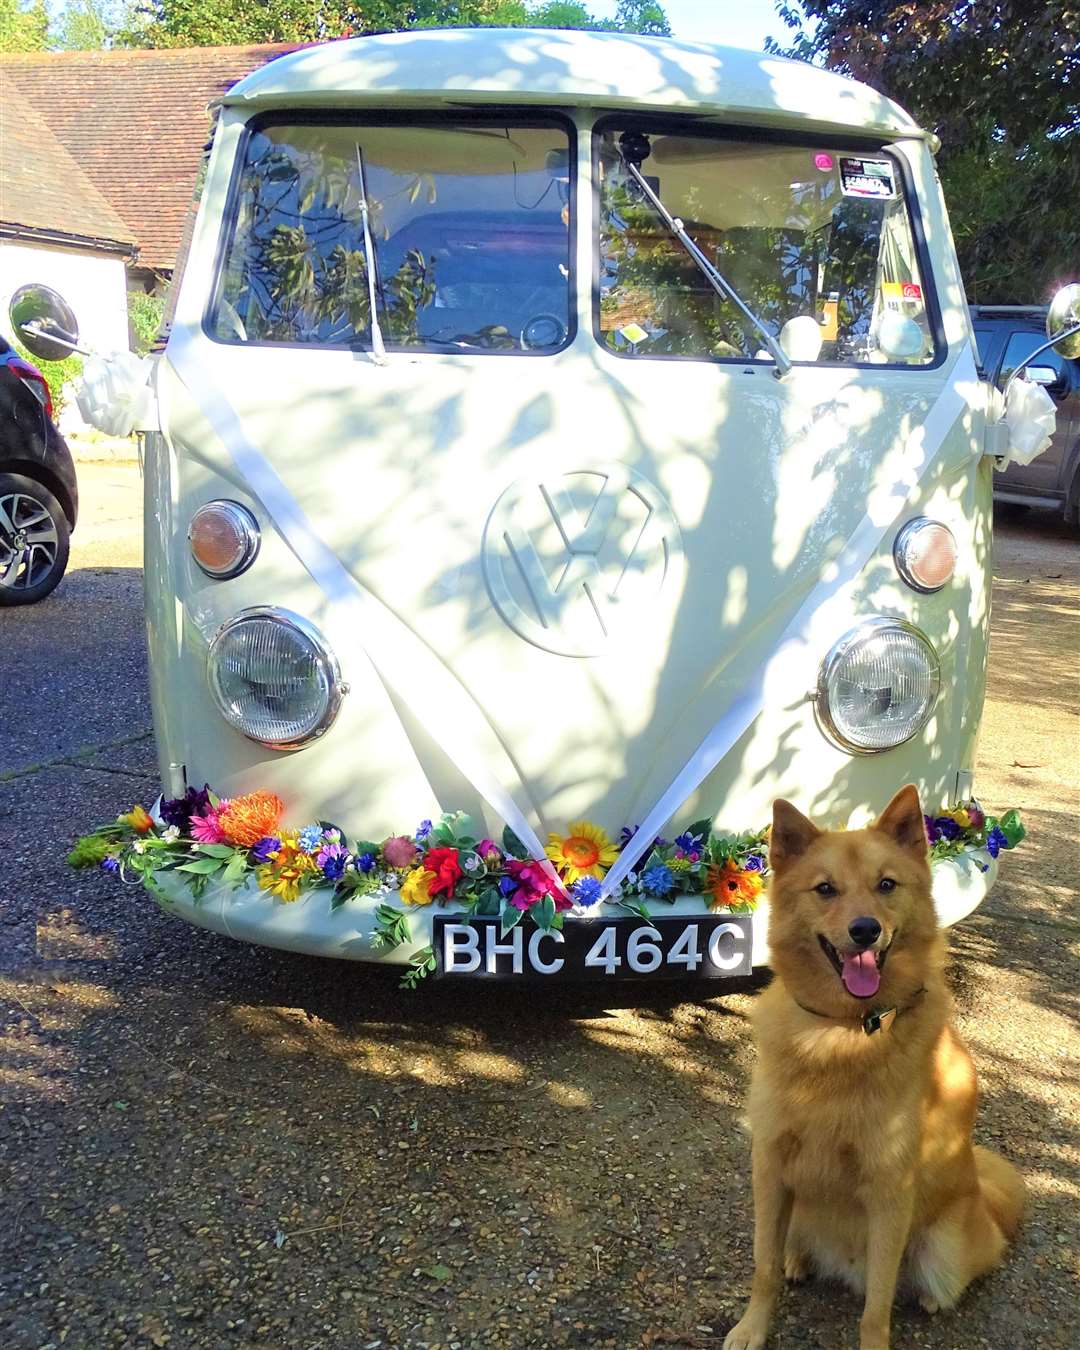 A wedding camper van and a dog! What a day Picture: Furrytail Weddings